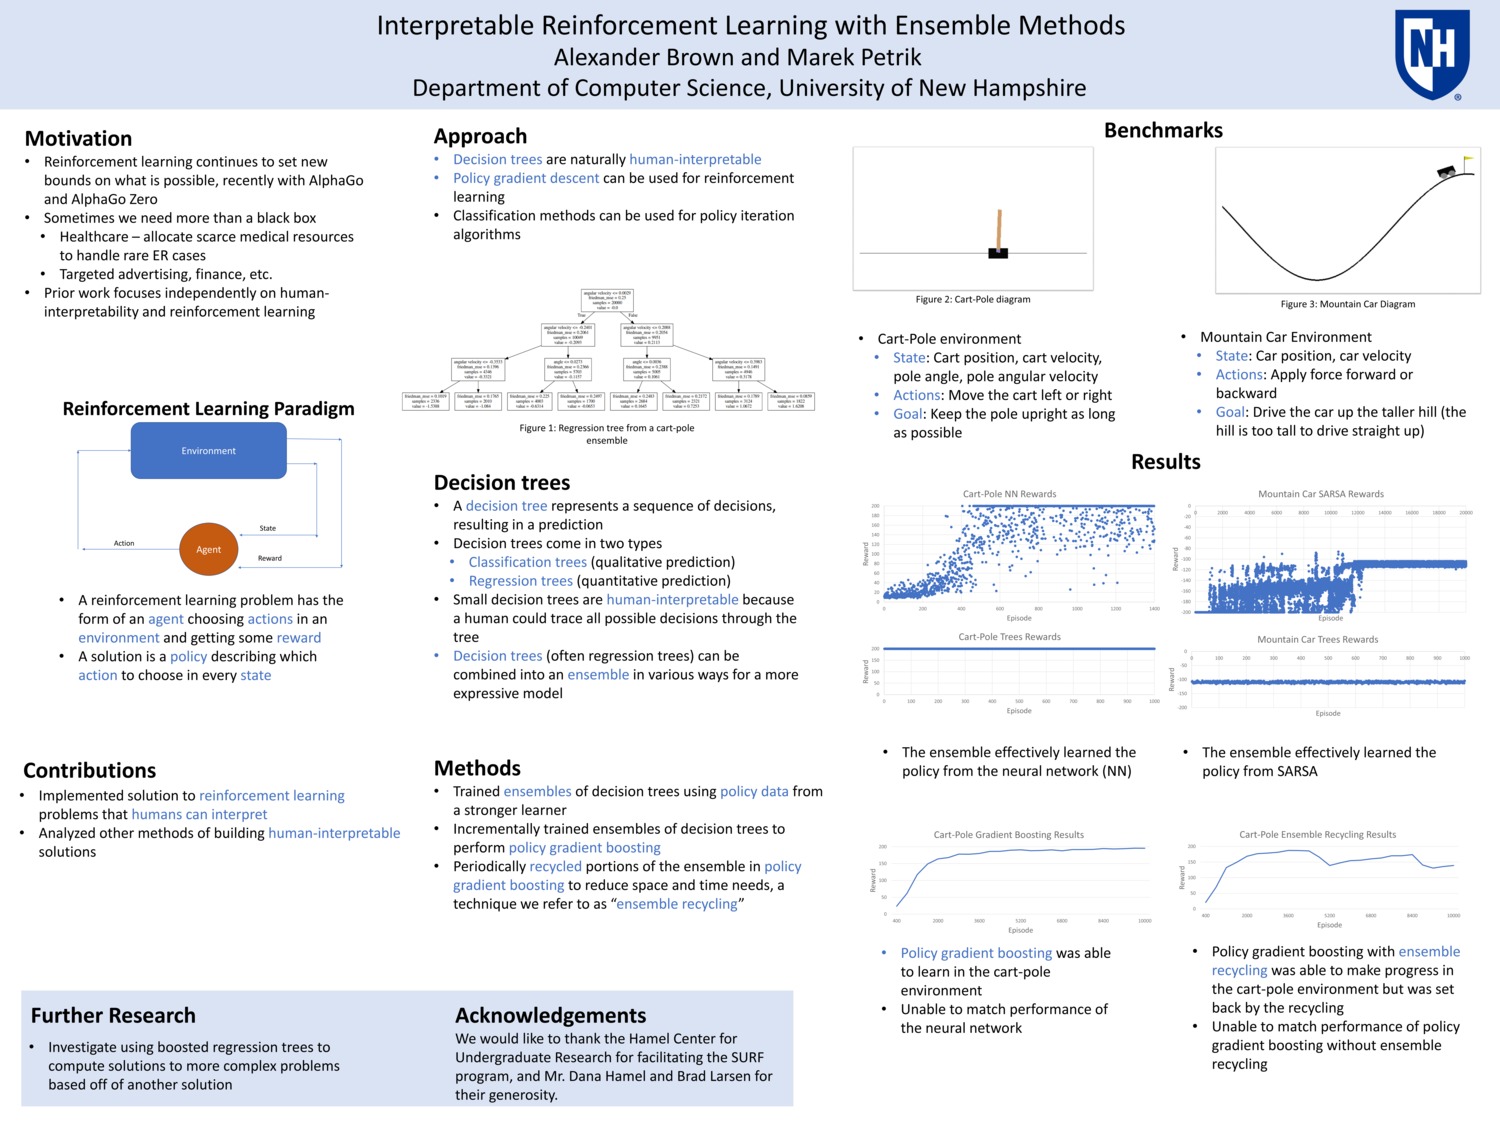 Interpretable Reinforcement Learning With Ensemble Methods by afb2001